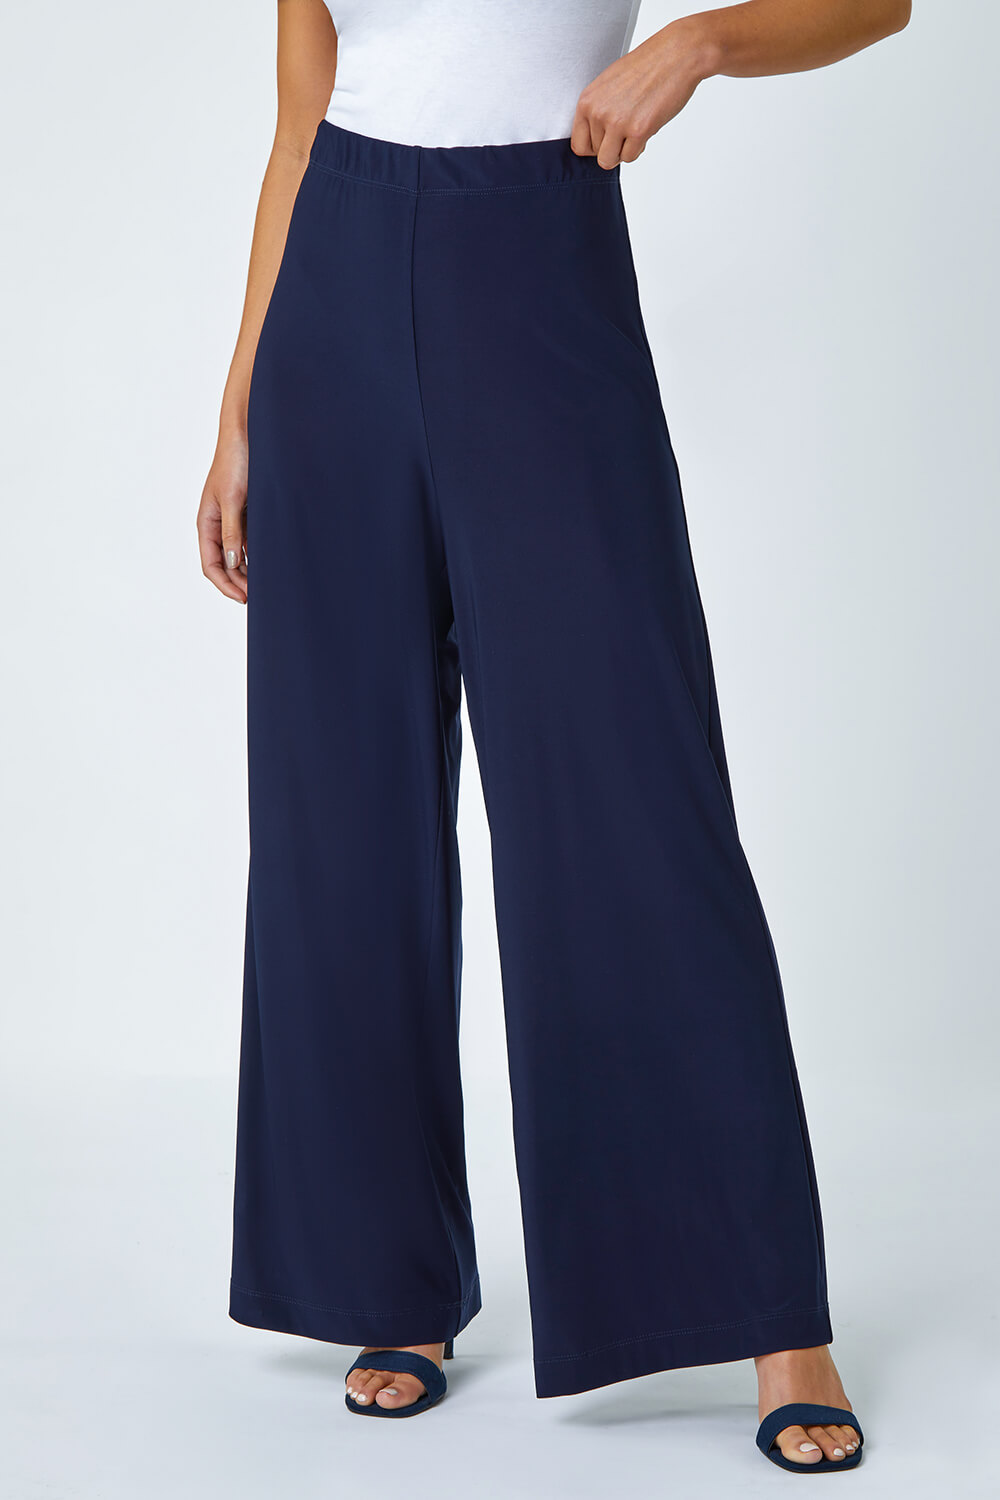 Navy  Petite Wide Leg Stretch Trouser, Image 4 of 5